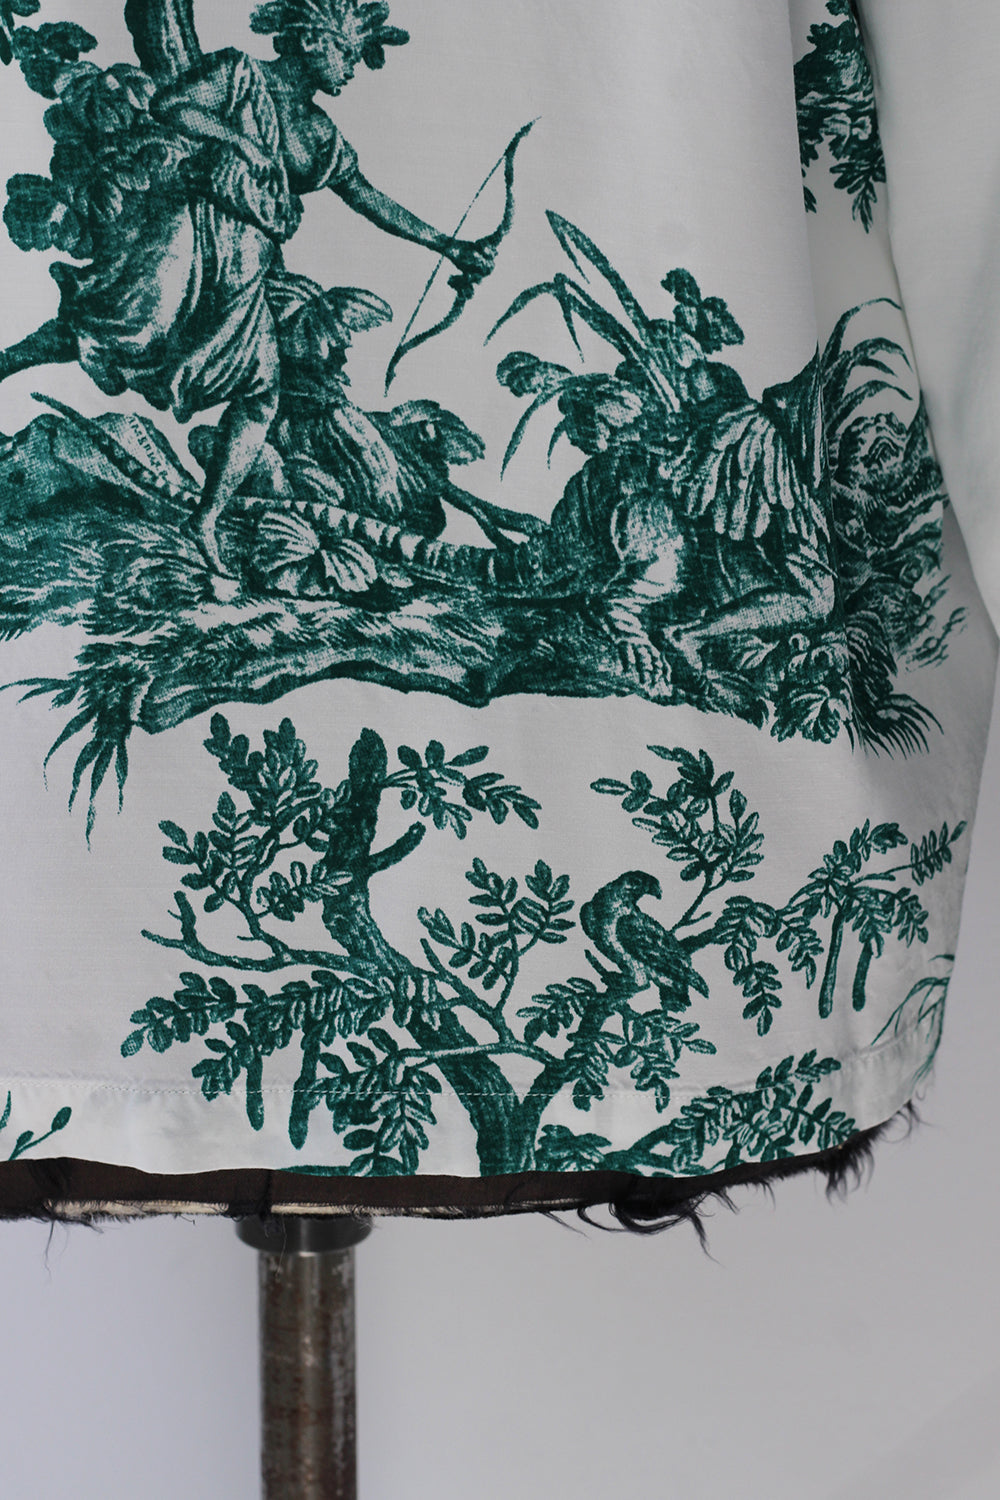 UNUSED "4 continents print long sleeve shirt" (white×green)